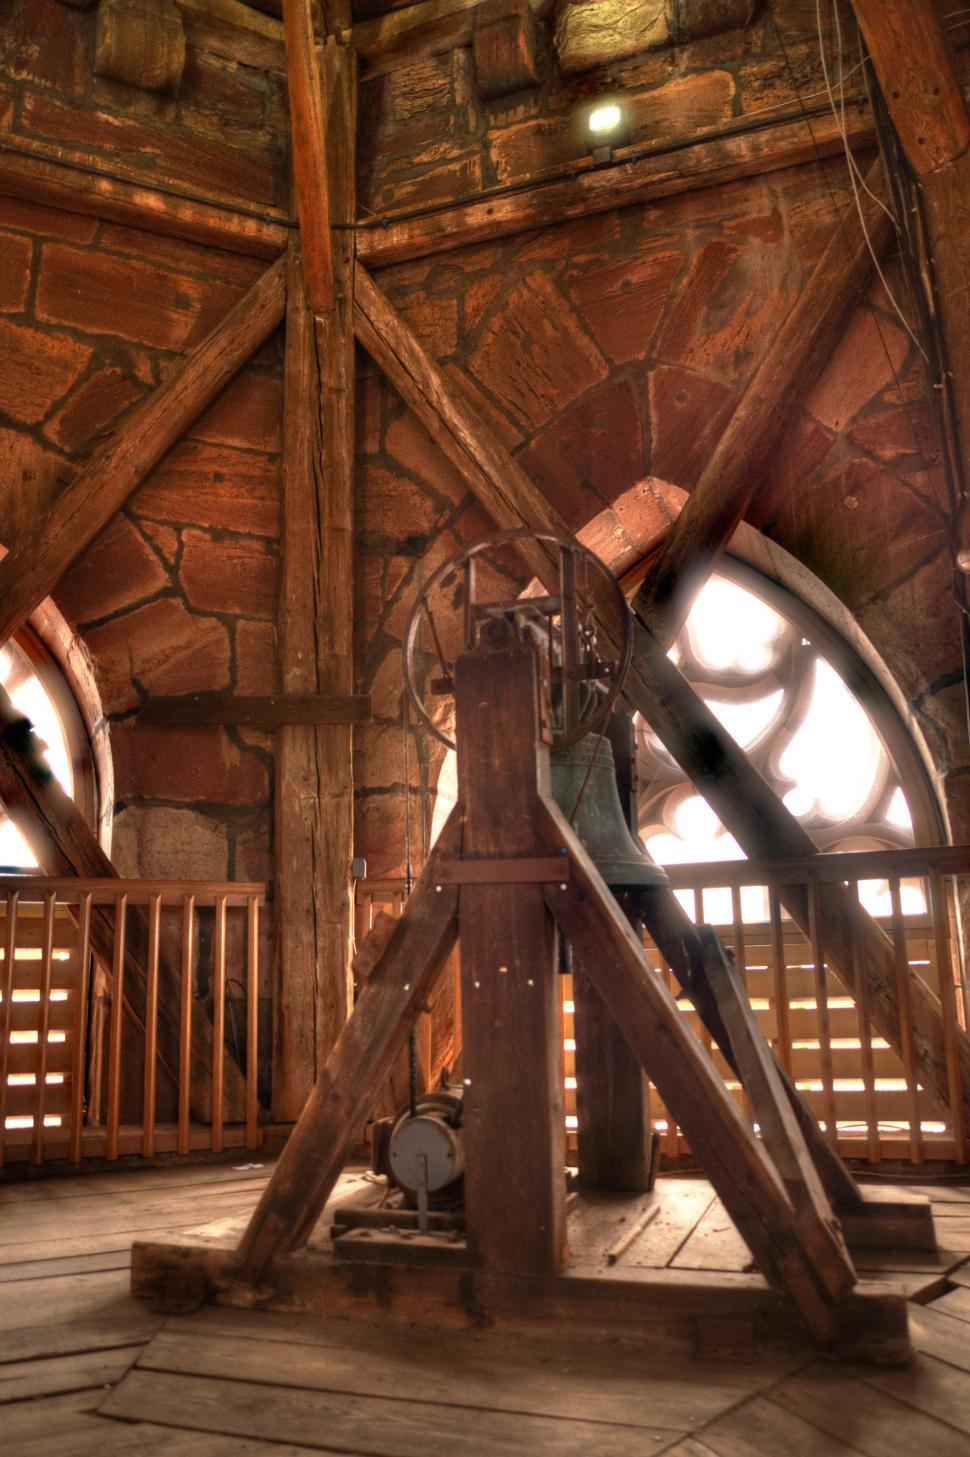 Free Image of Large Wooden Structure With Clock on Top 